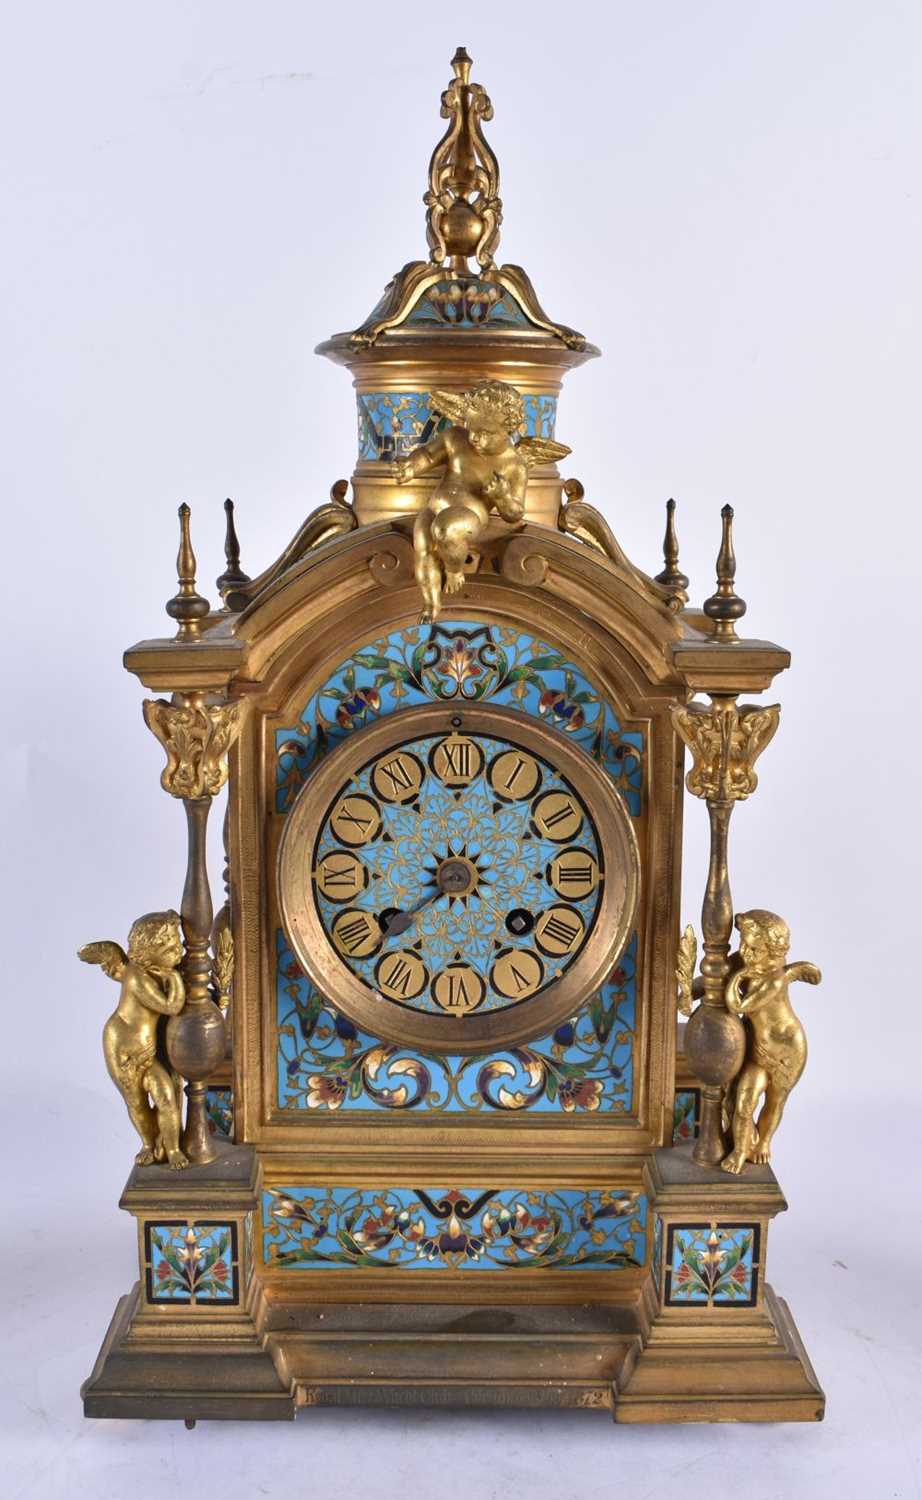 A FINE 19TH CENTURY FRENCH ORMOLU AND CHAMPLEVE ENAMEL CLOCK GARNITURE formed with putti amongst - Image 2 of 9